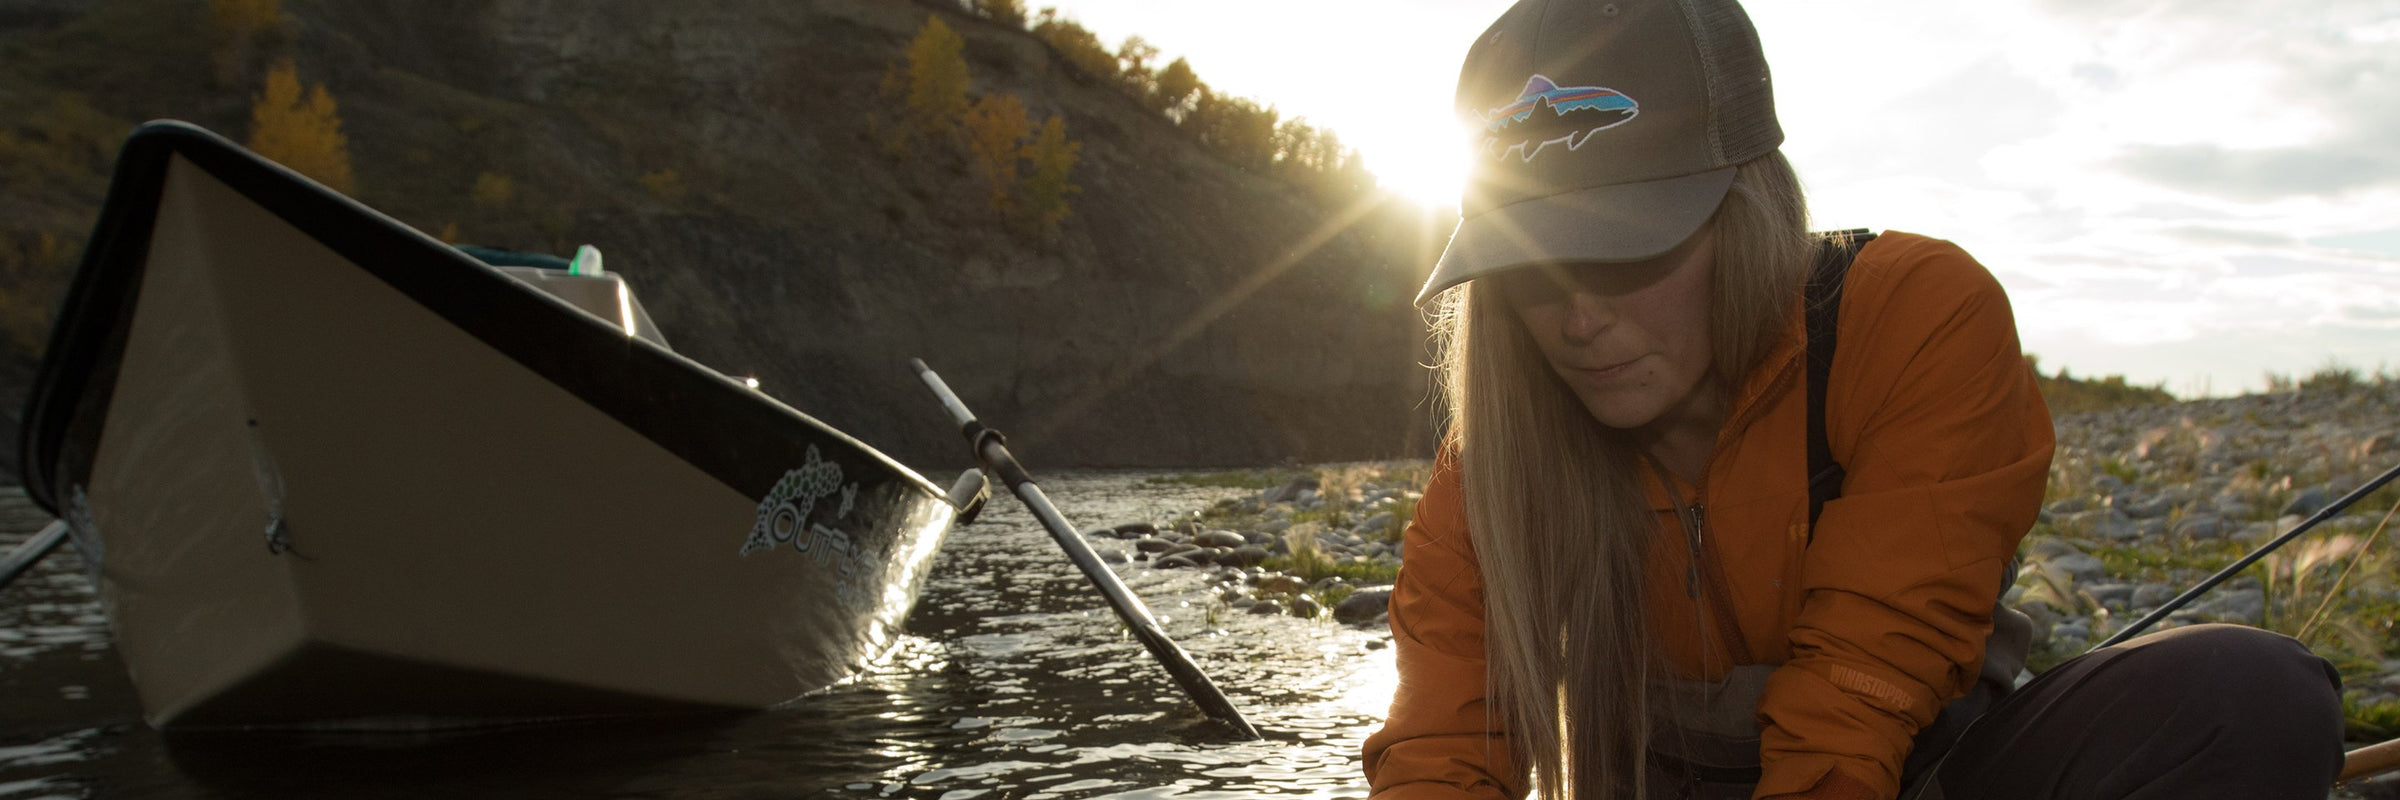 Camo Hats – Out Fly Fishing